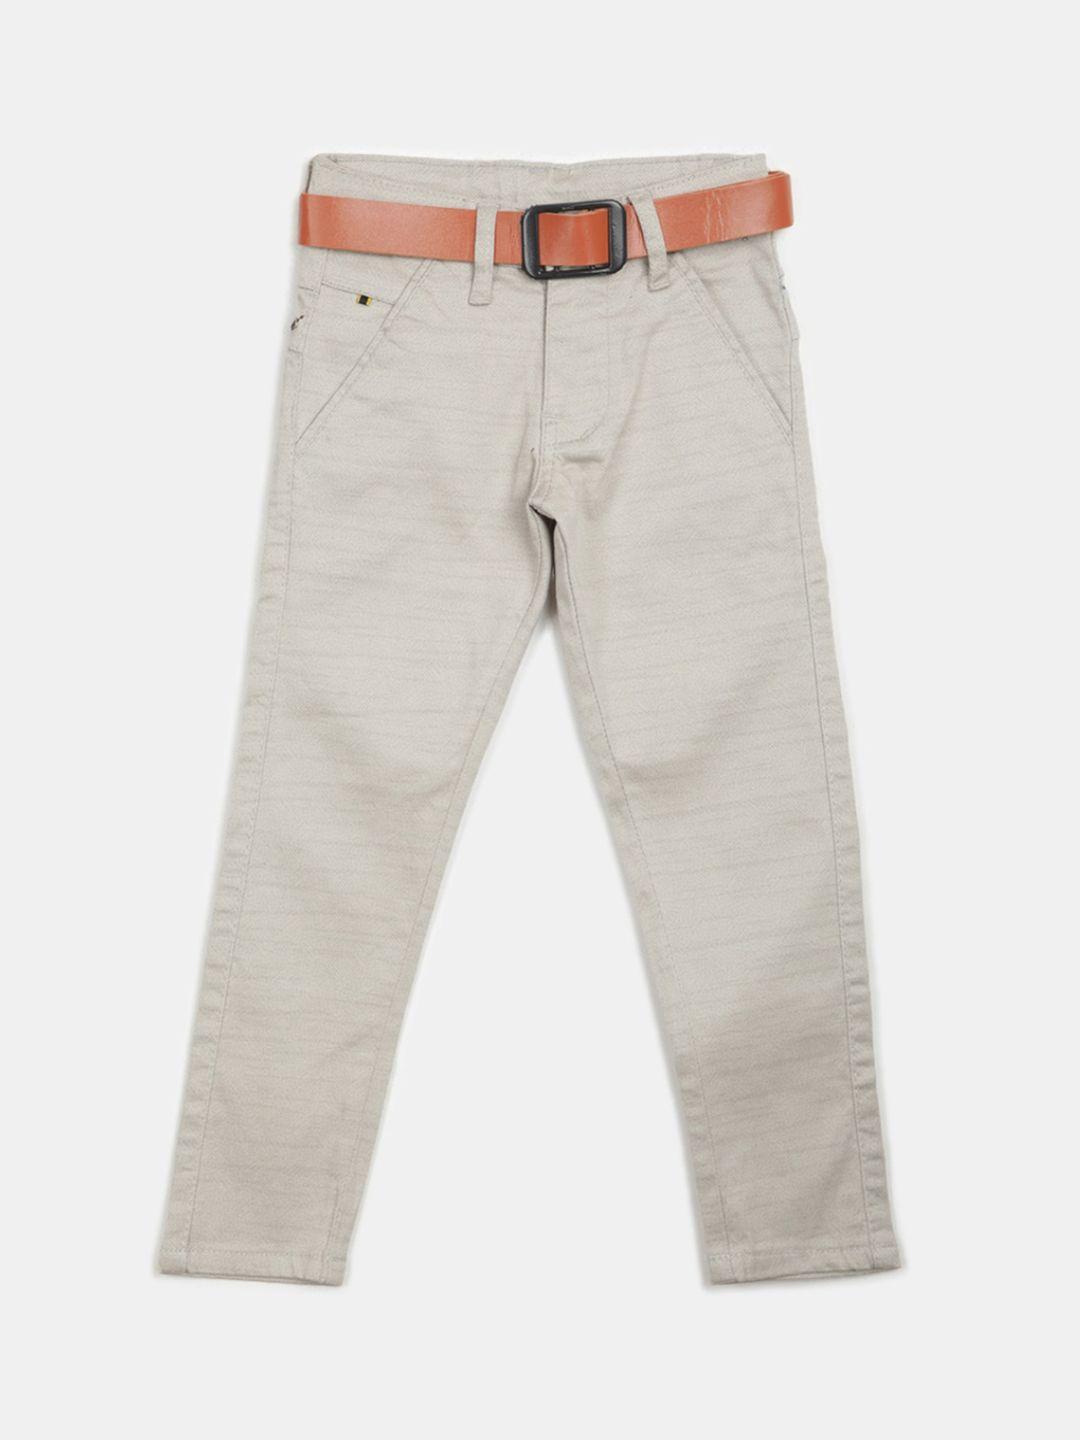 v-mart boys mid rise chinos trousers